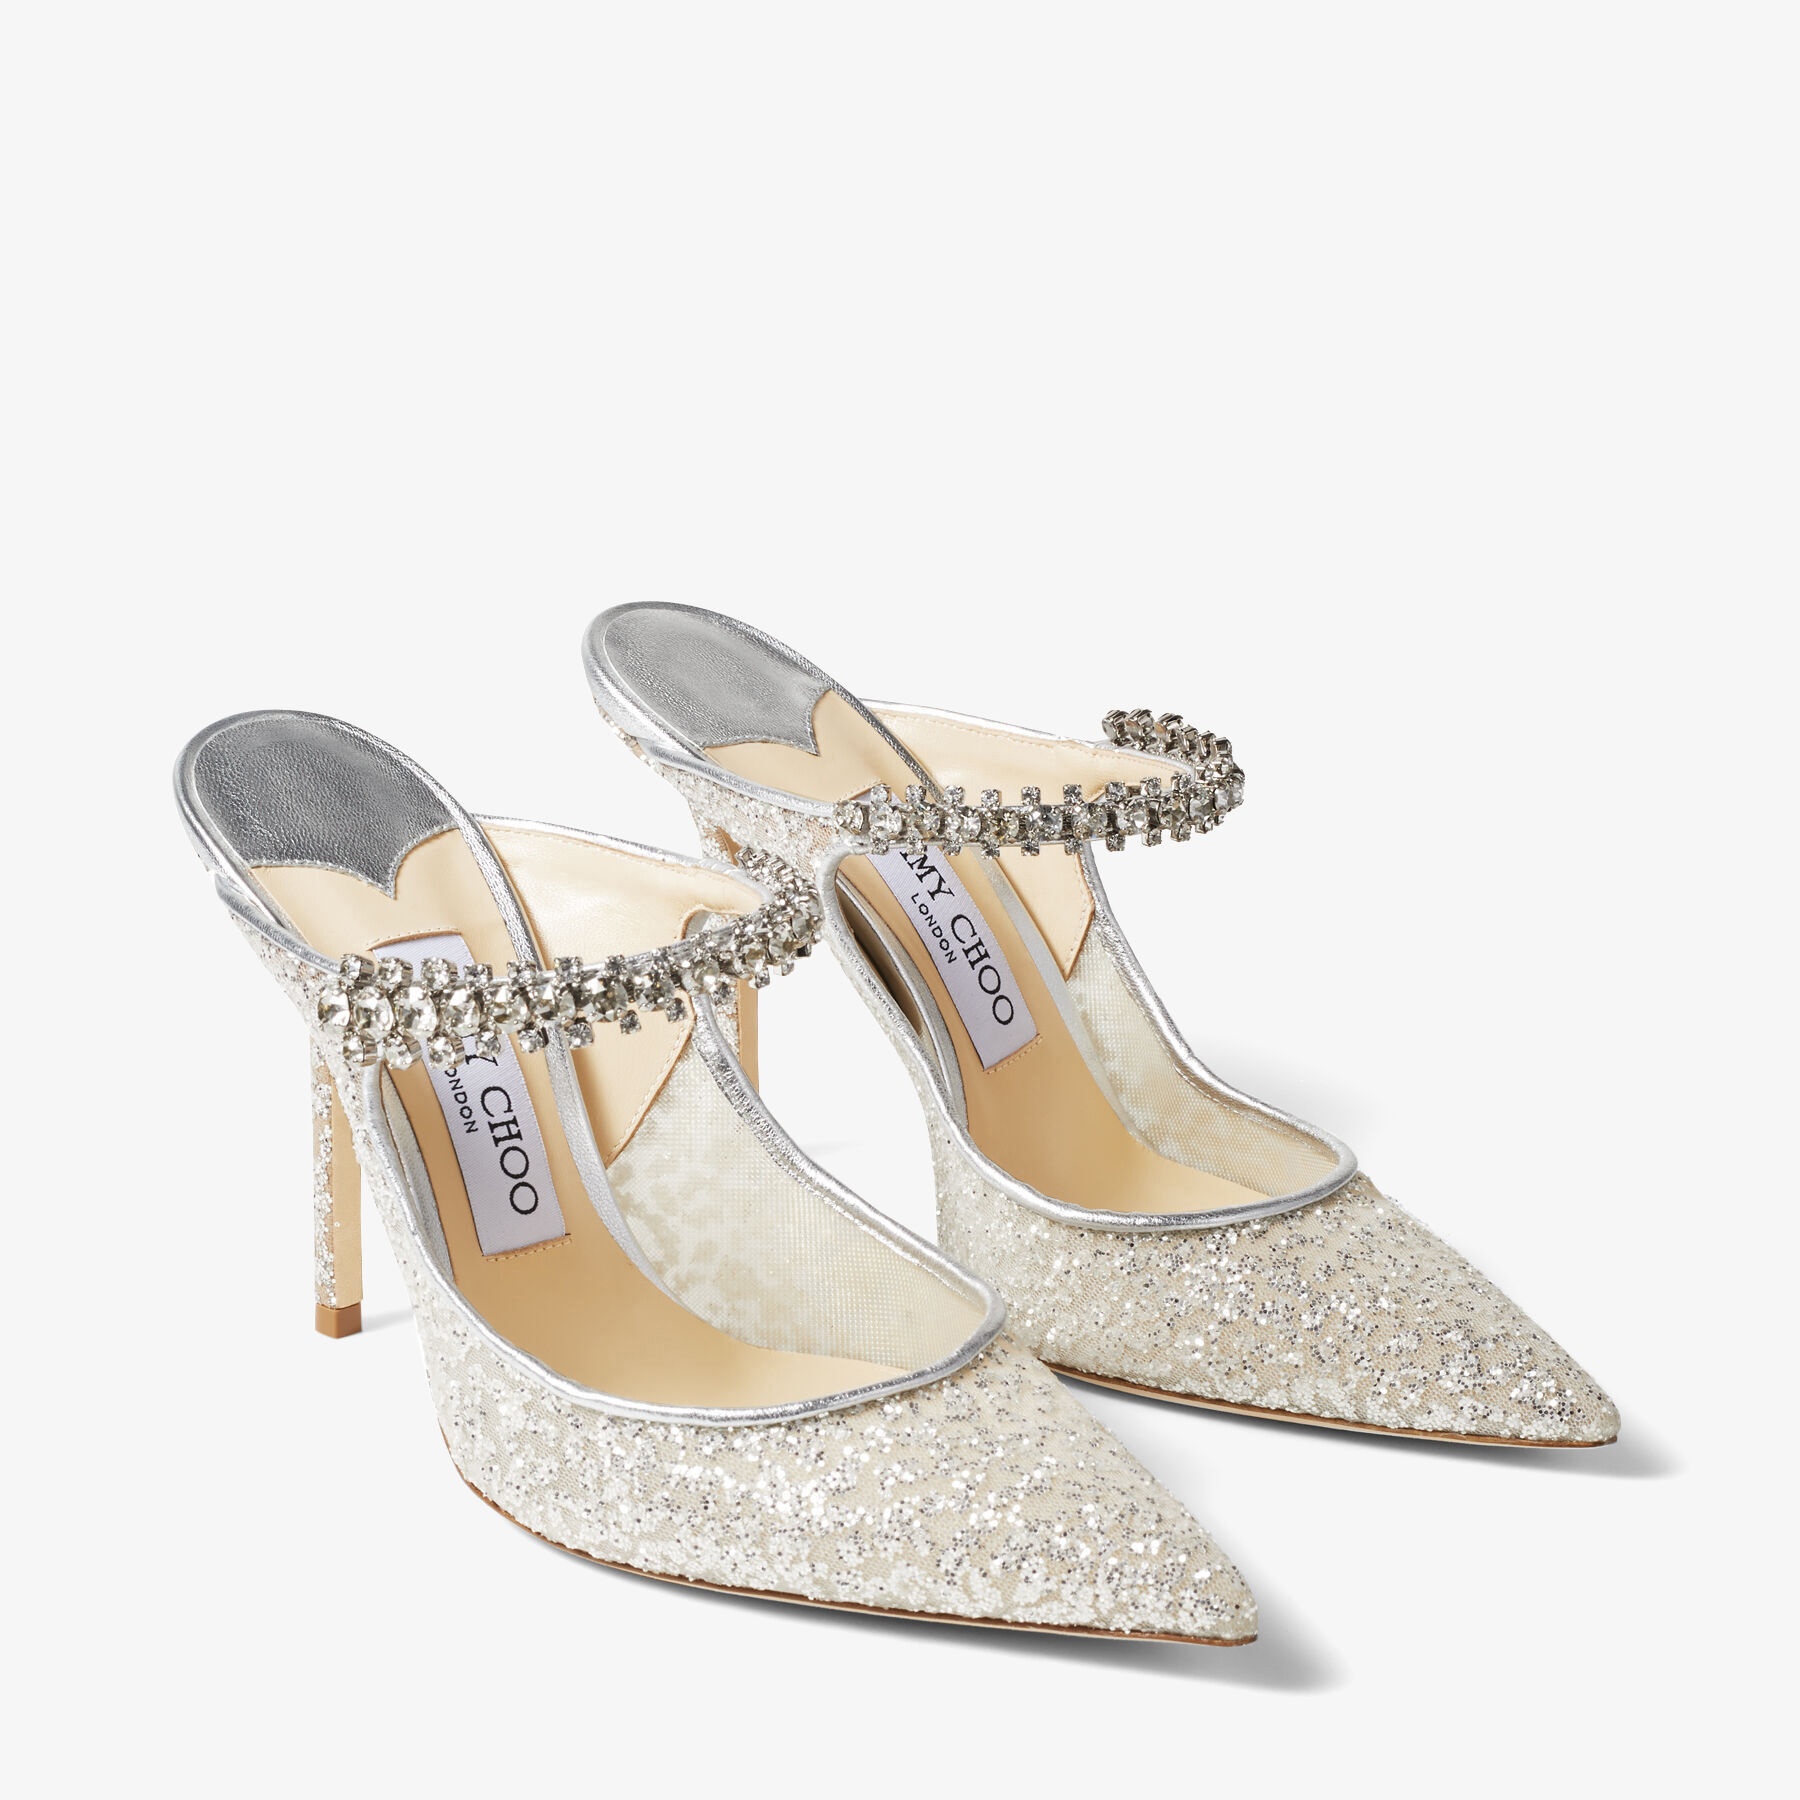 Bing 100
Silver Glitter Tulle Mules with Crystal Strap - 3